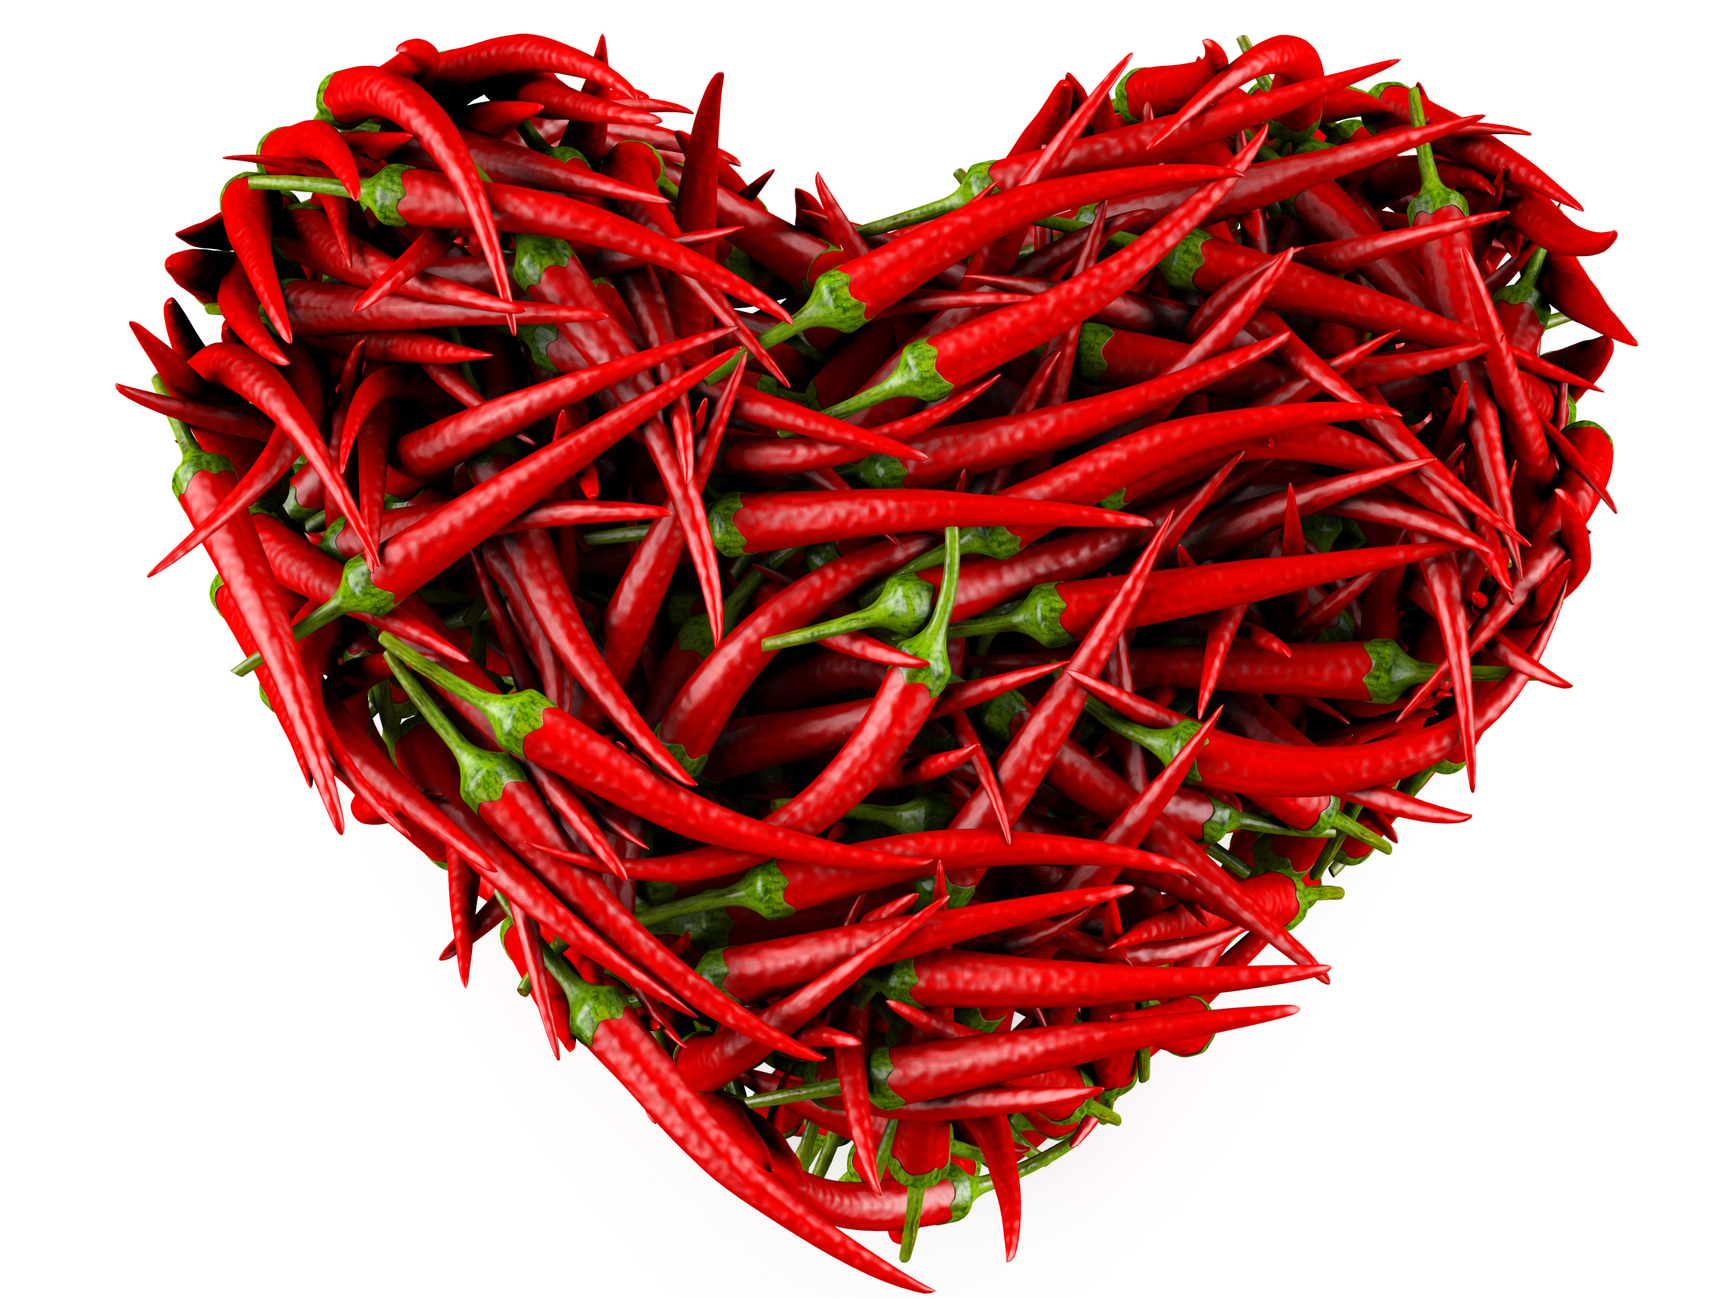 Eat chili peppers to cut your stroke risk in half, even on a bad diet